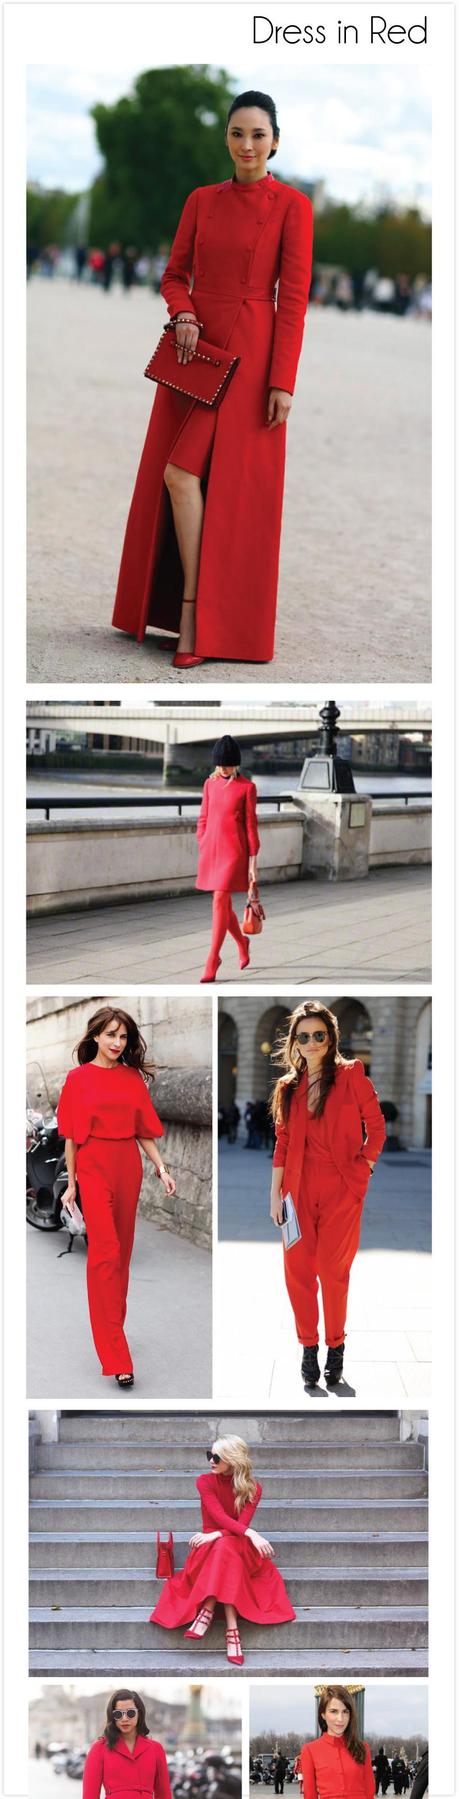  photo monocolor-street_style--red_zps1abf4adf.jpg